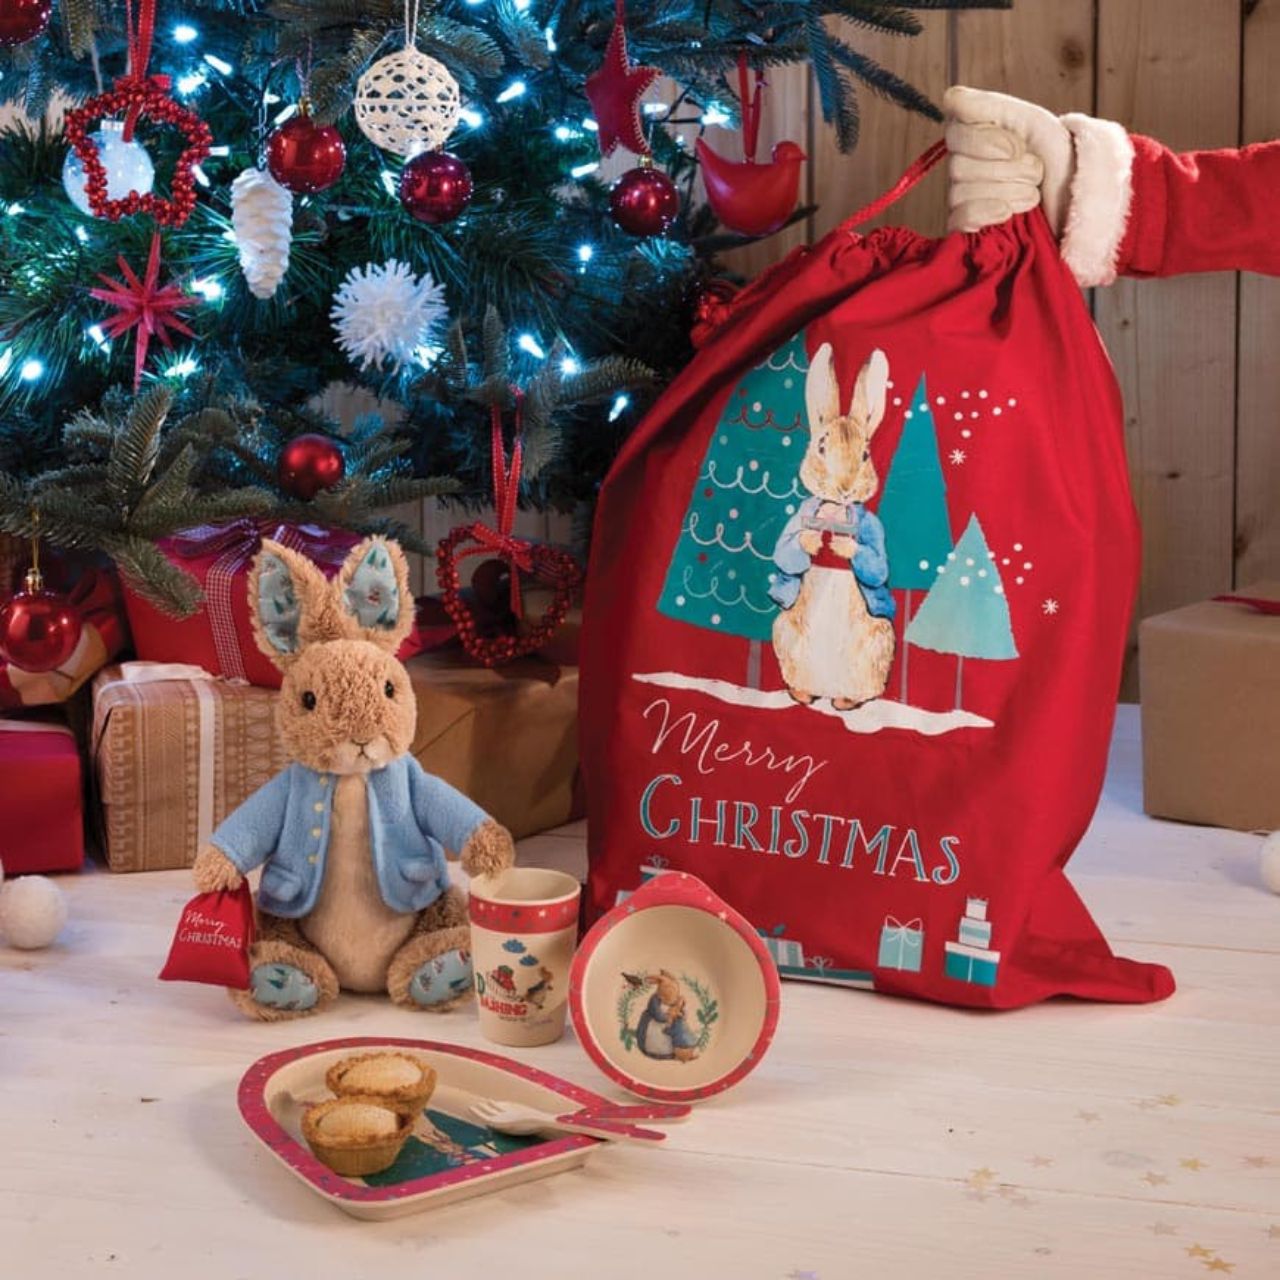 Peter Rabbit Christmas Sack  This Charming Peter Rabbit Christmas sack makes a brilliant alternative to a Christmas stocking, so why not make a new tradition this Christmas. Made of 100% cotton, this Christmas sack is durable and can be used year after year.